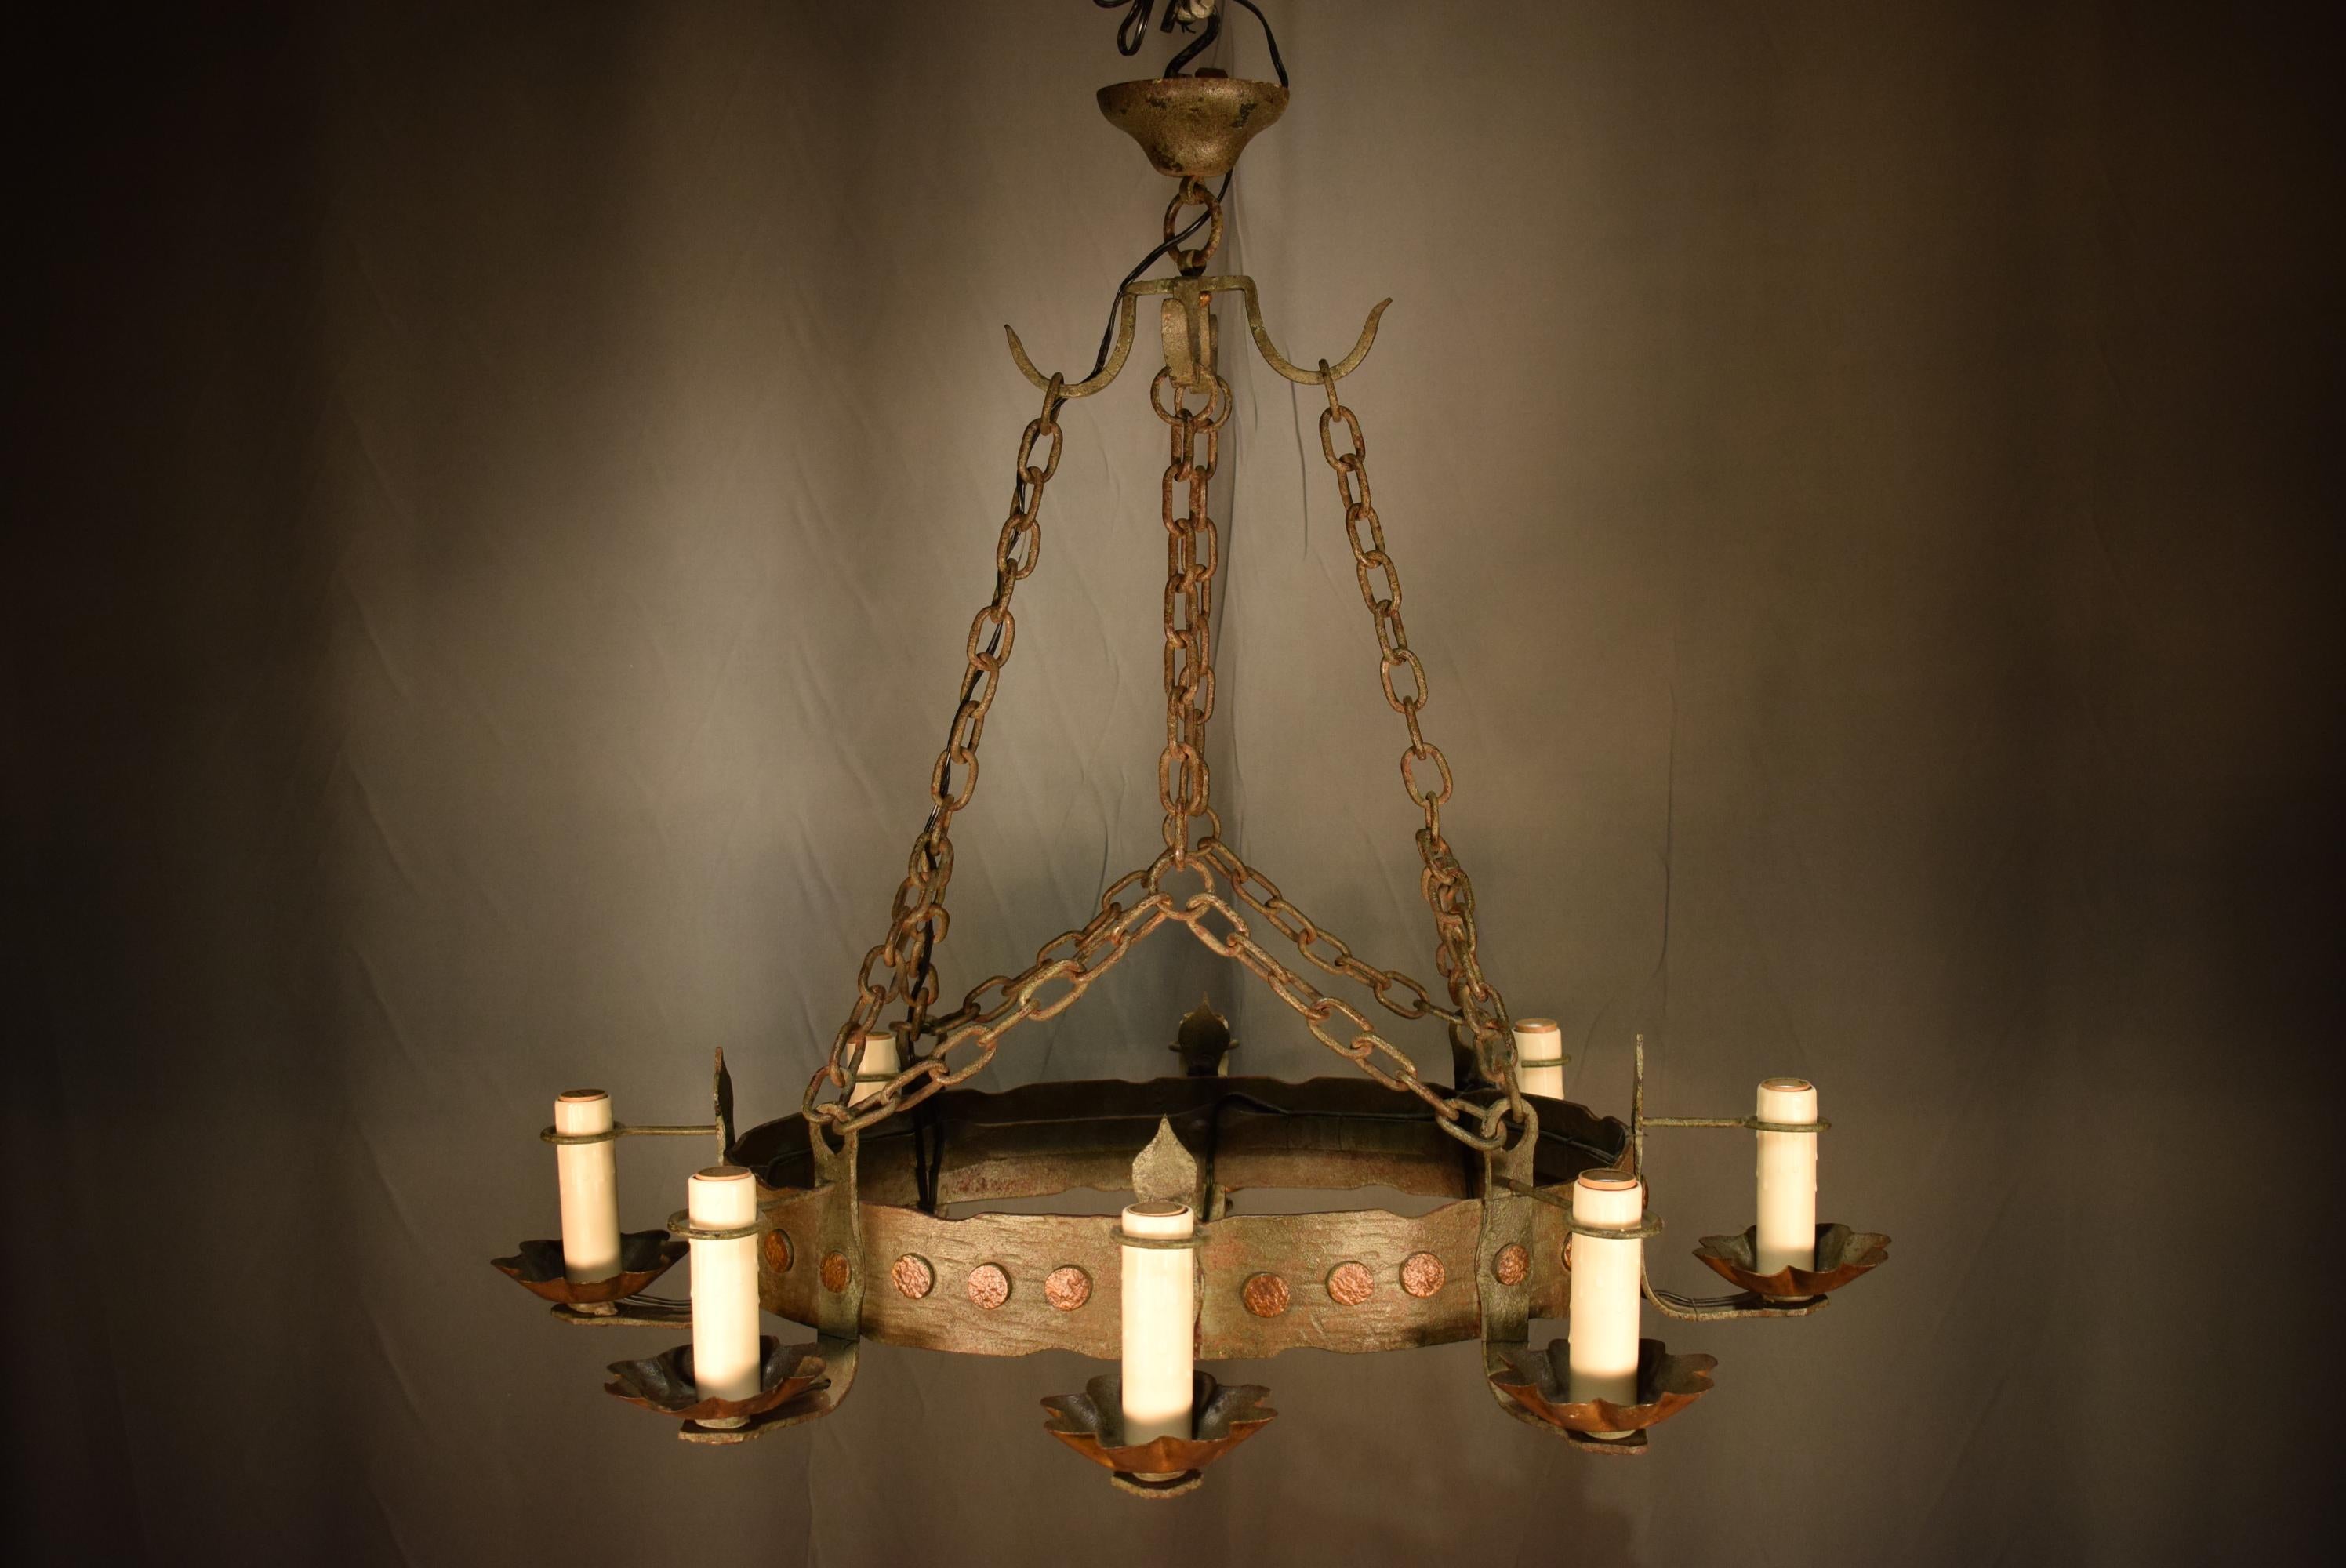 A very Fine oval iron chandelier in the Tudor style. France, circa 1910
8 Lights. A pair available
Dimensions: Height 32